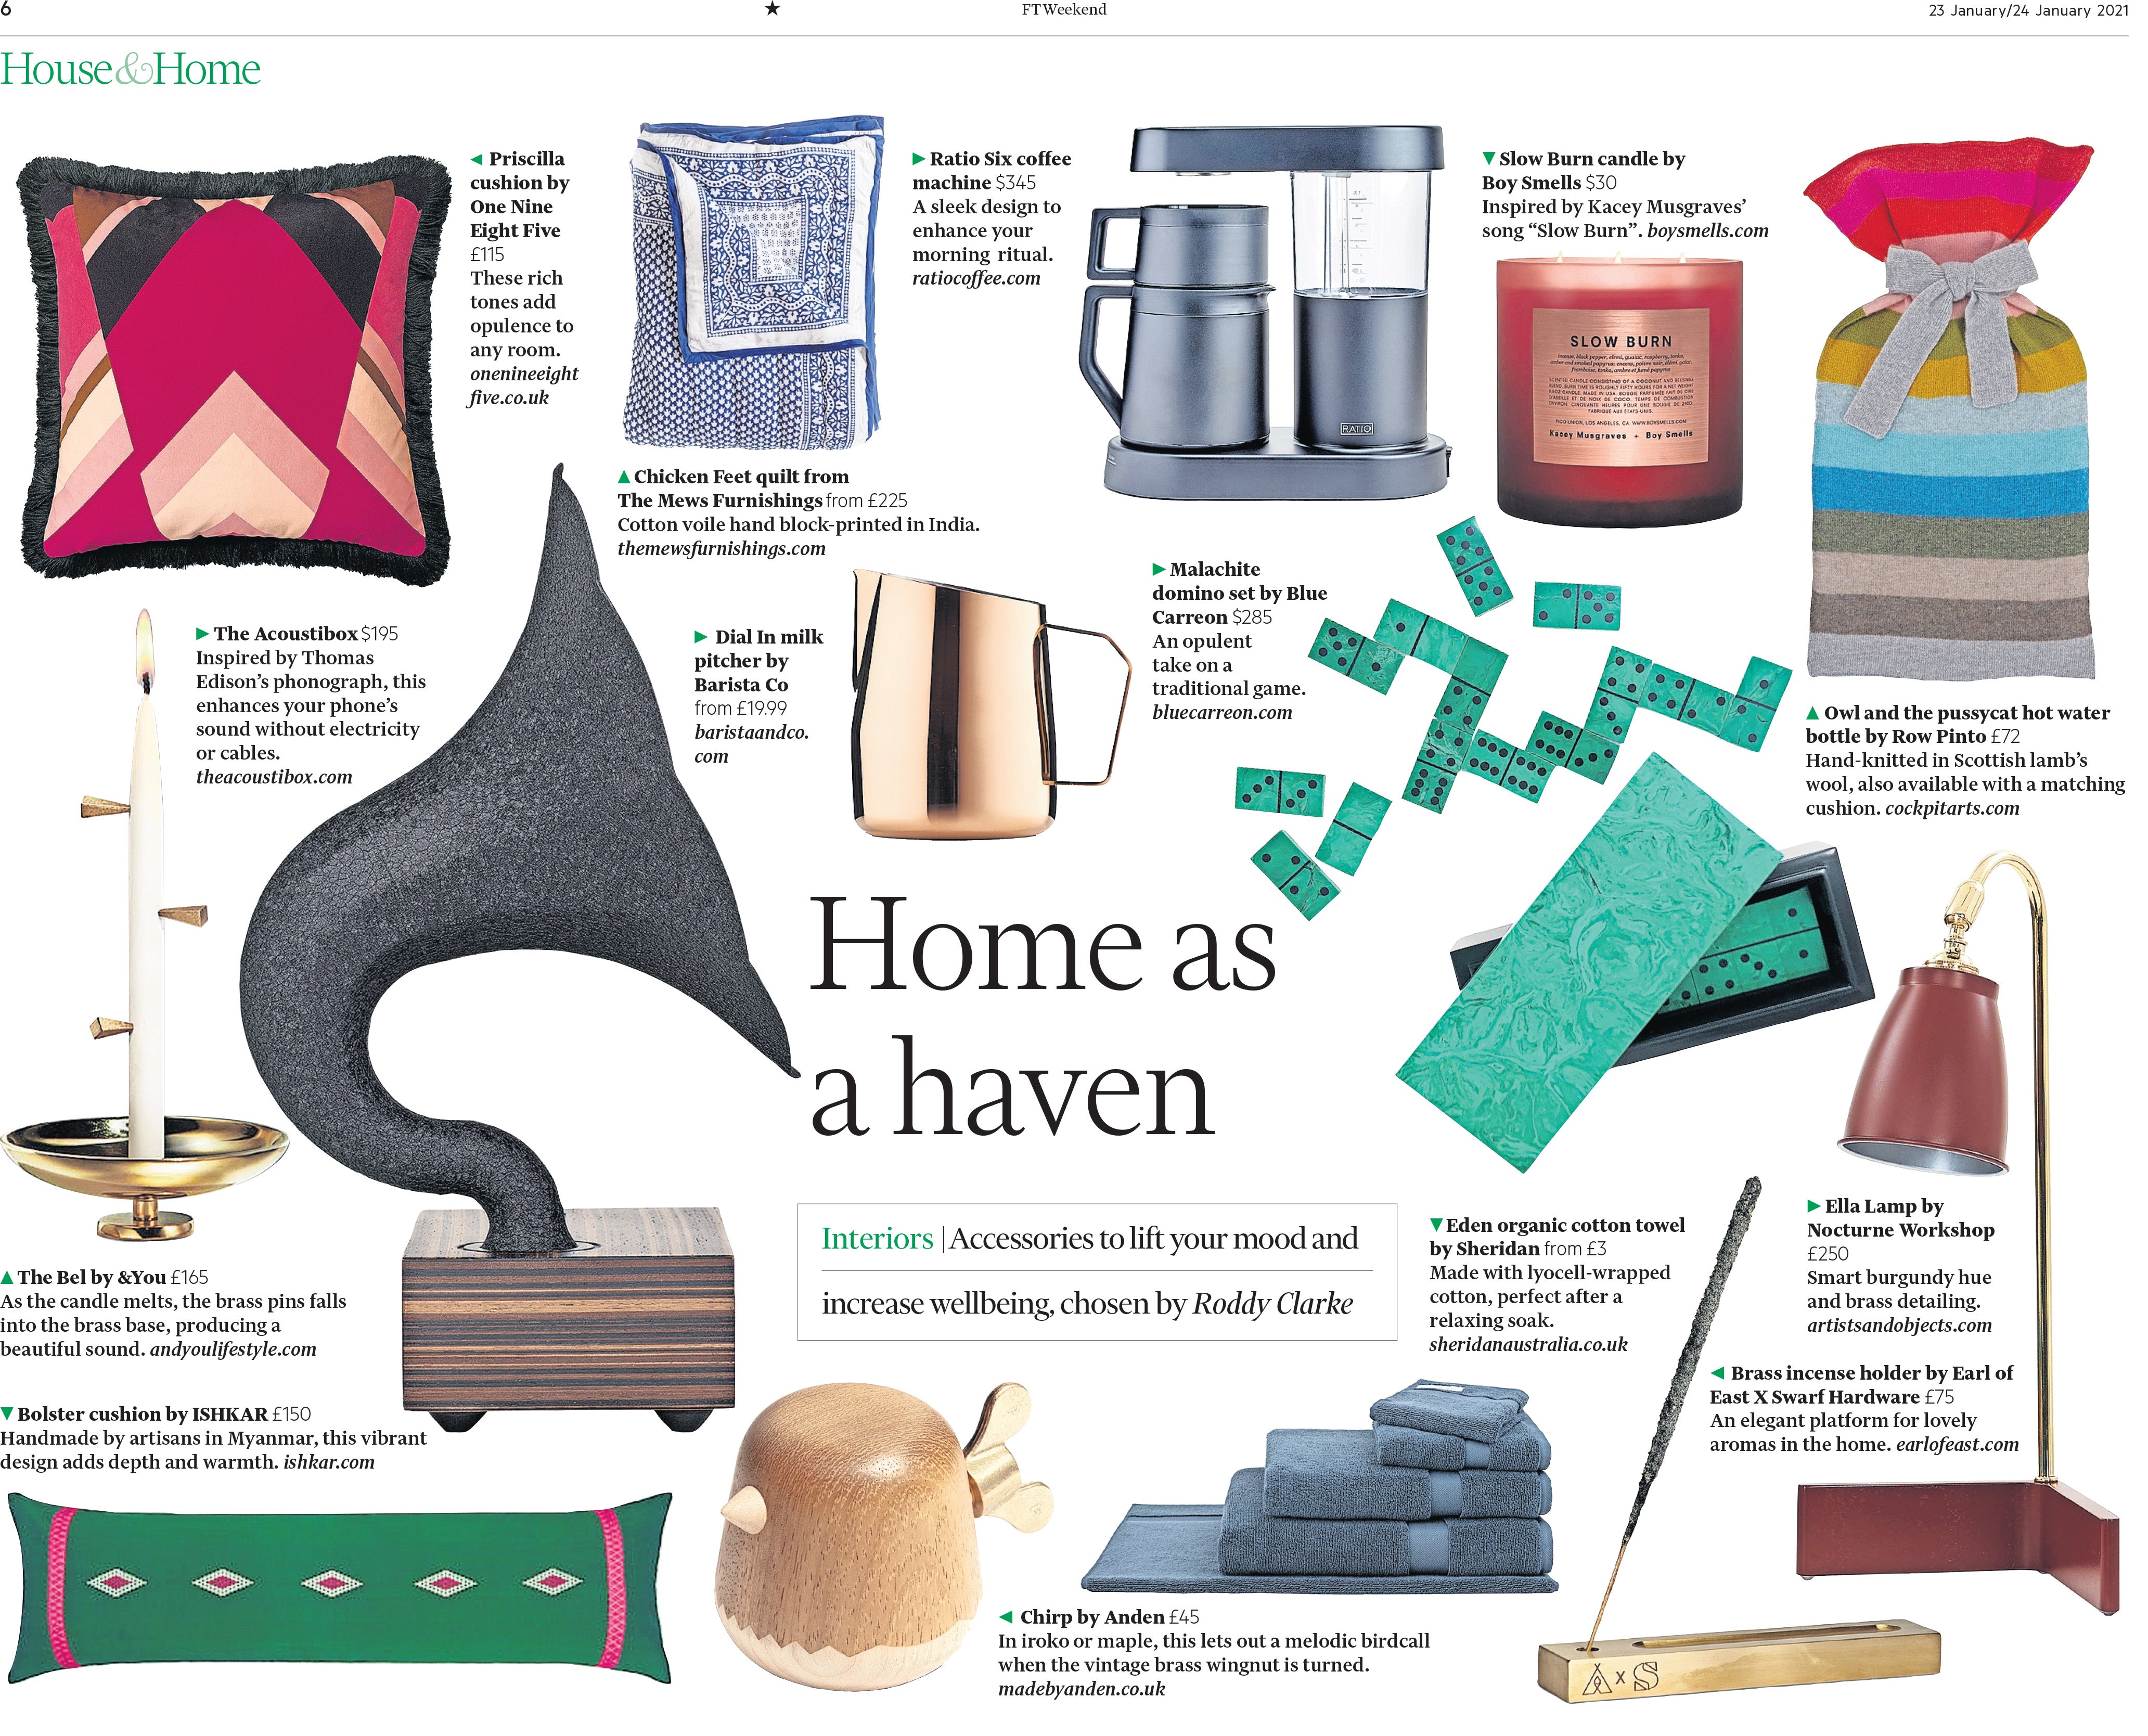 FT Weekend House and Home  - Pigott's Store Quilt - 23 Jan 2021